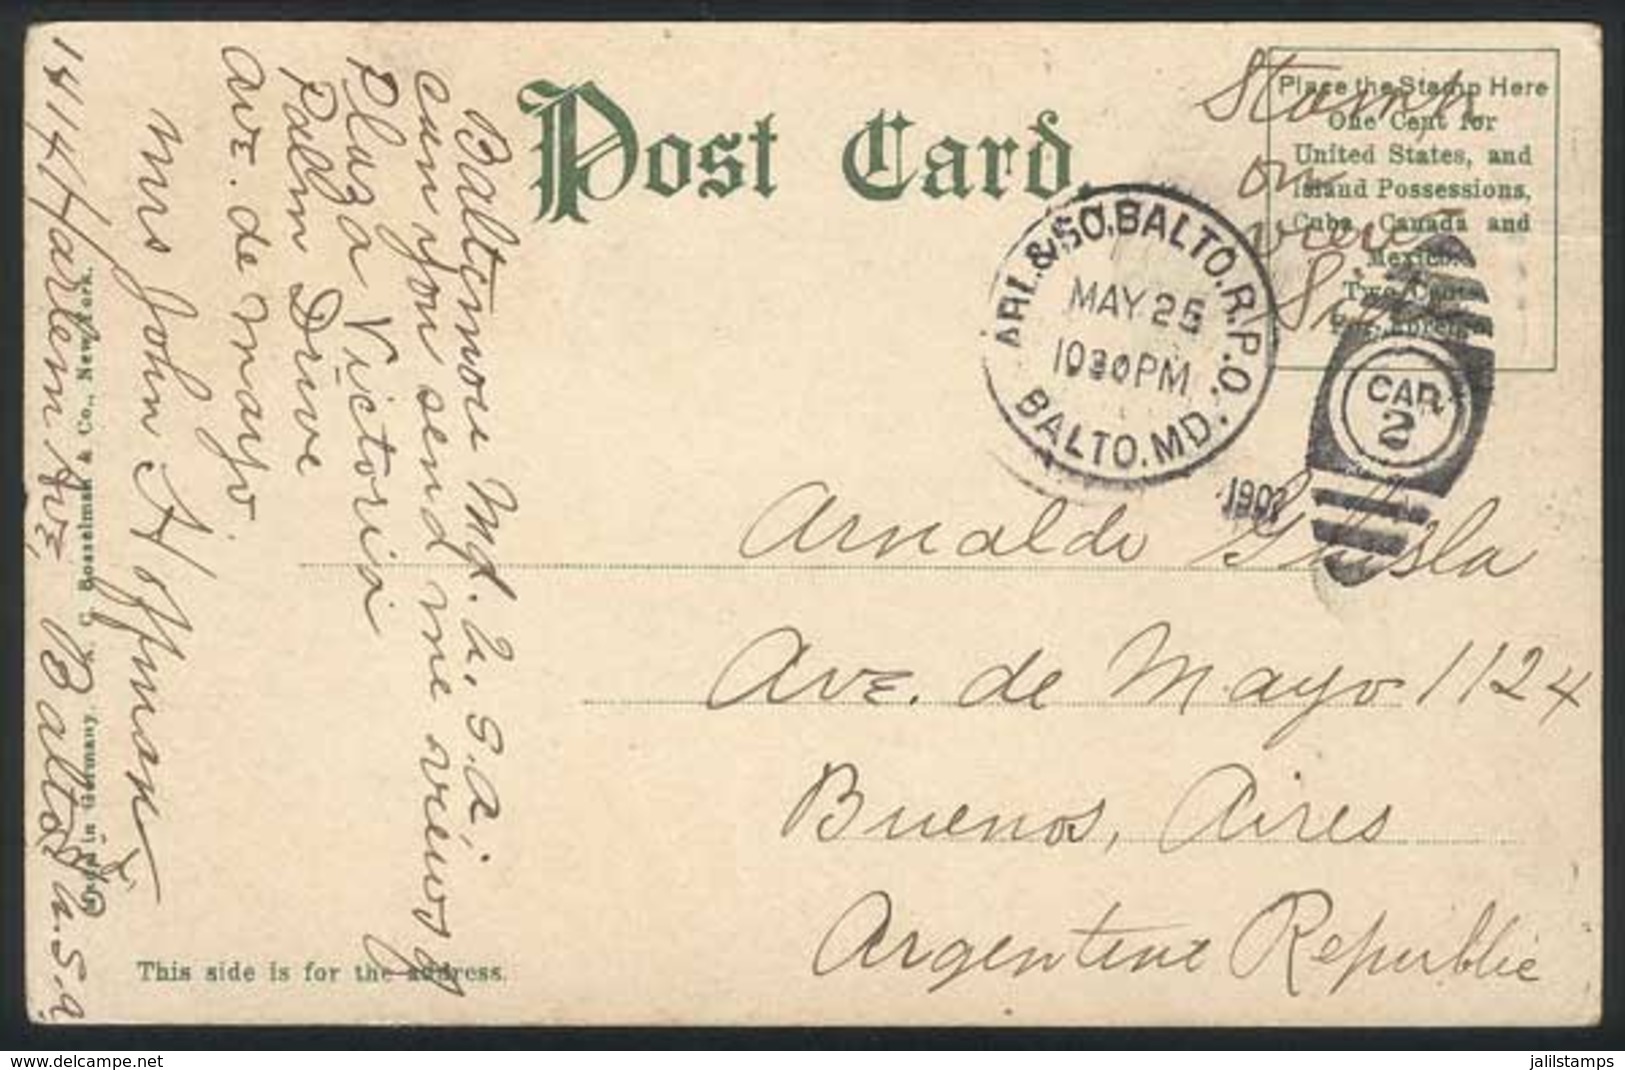 UNITED STATES: Postcard (view Of Pennsylvania Ave., Washington DC) Franked With 2c. And Sent From Baltimore To Argentina - Postal History